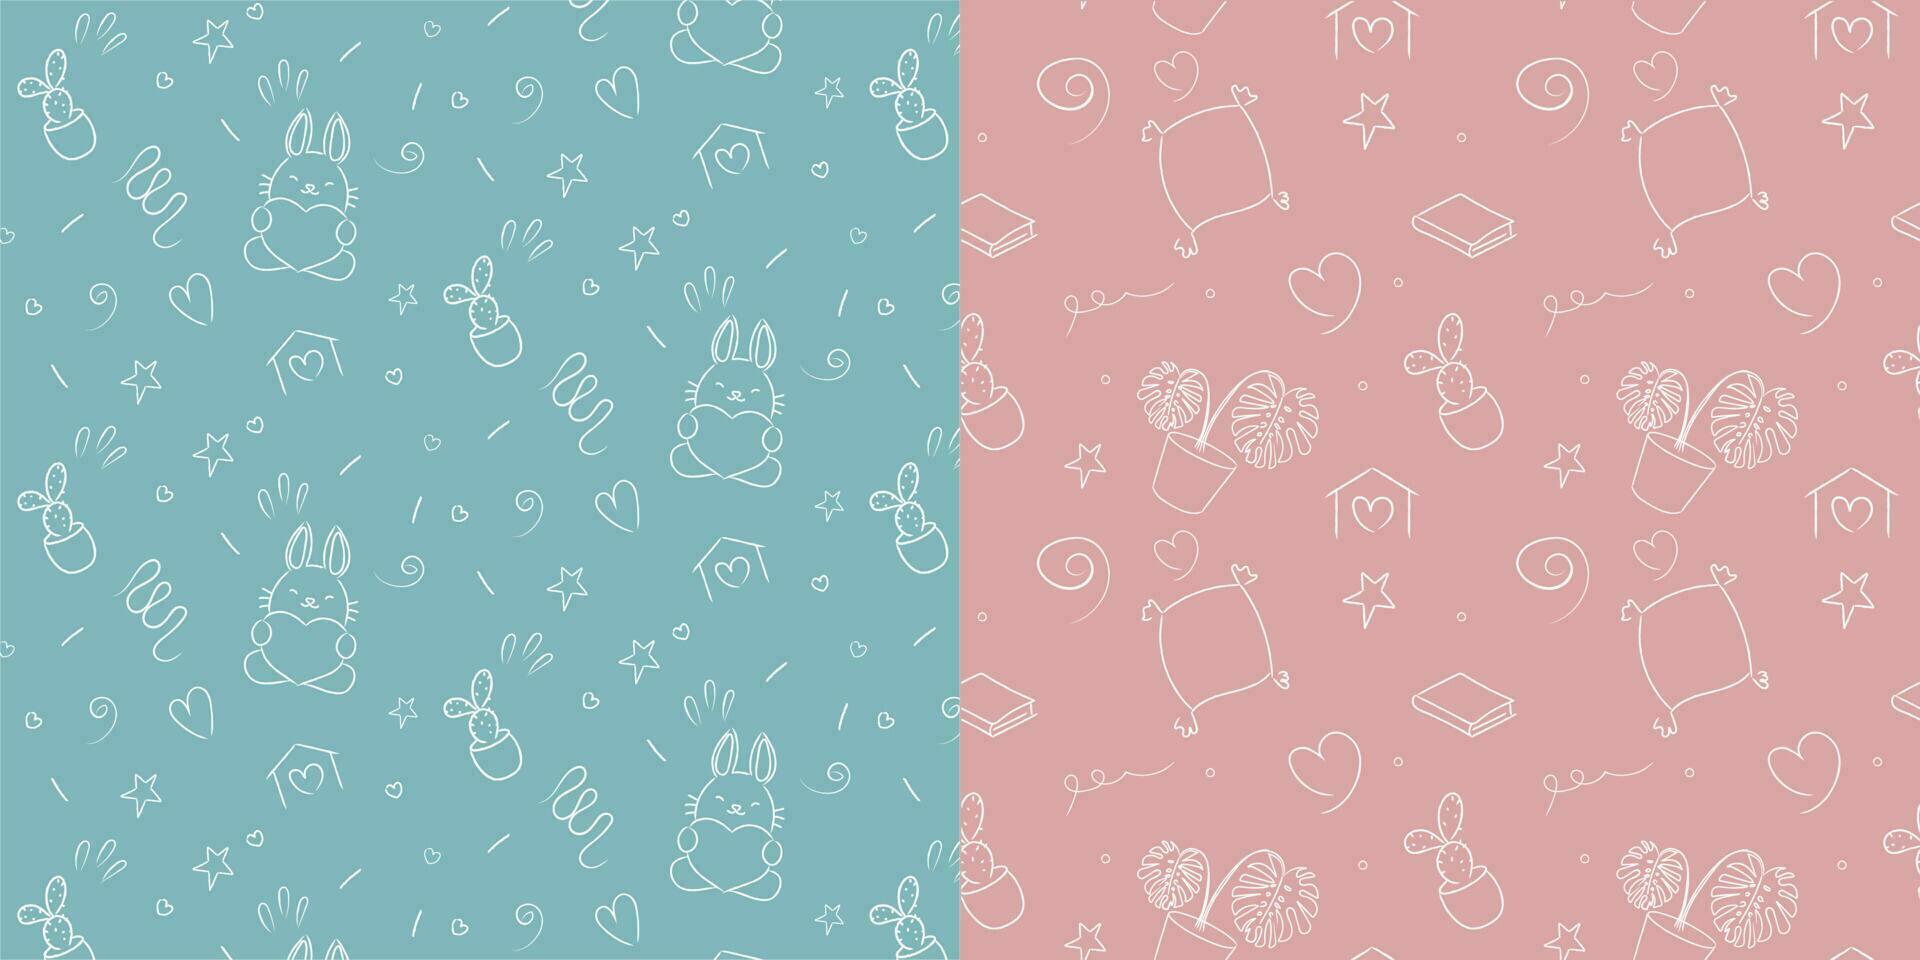 Patter hand drawn in doodle style, children, drawn bunny, heart, star, cactus, pillow, flowers pink turquoise blue vector